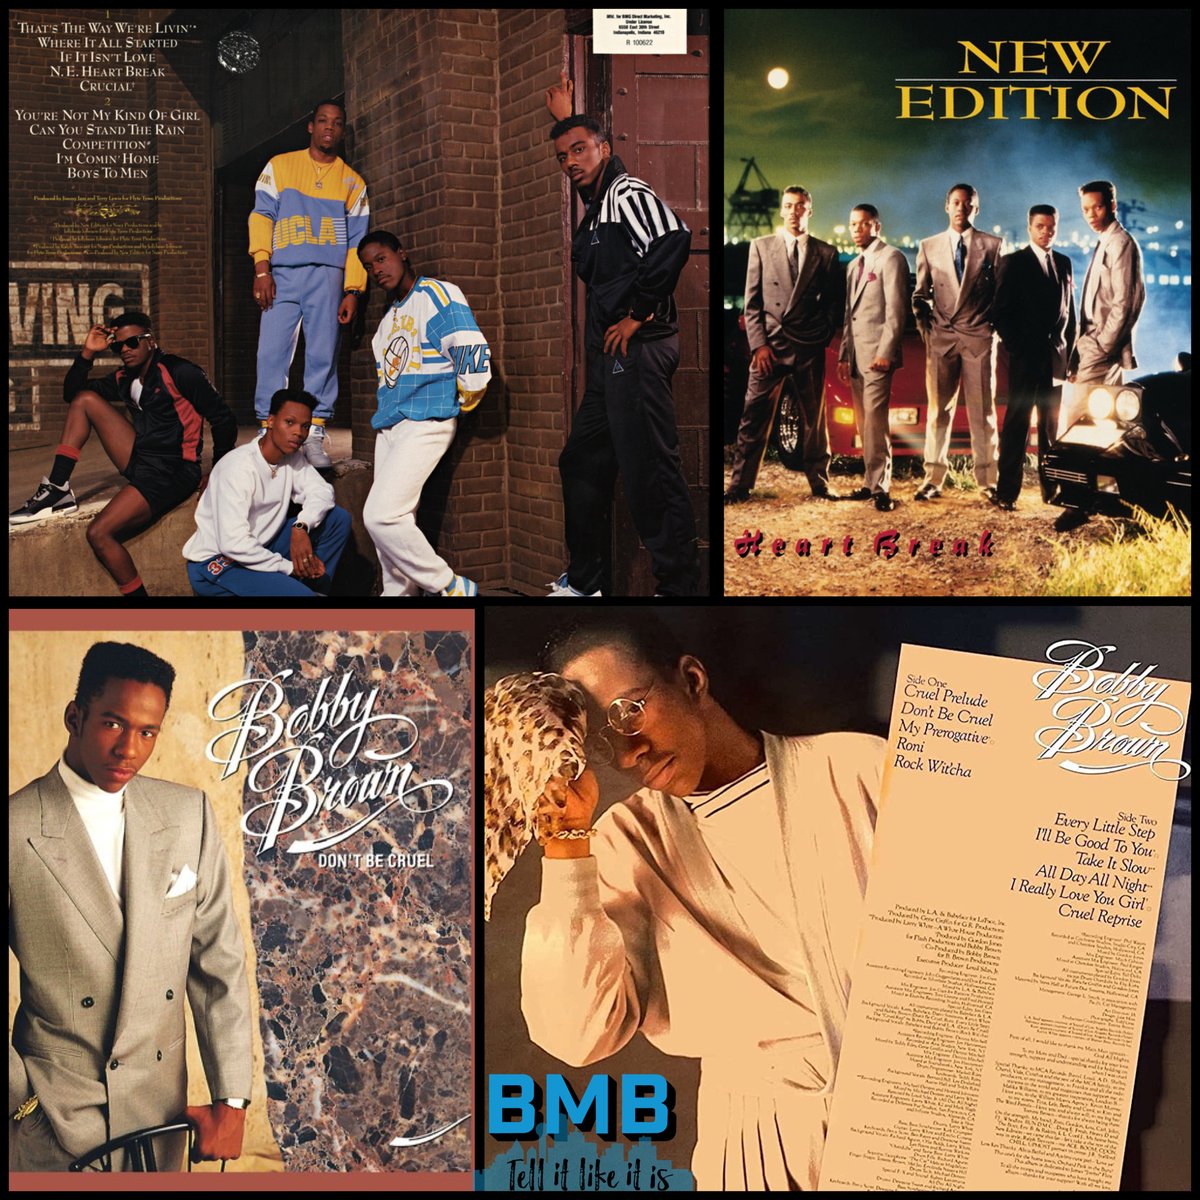 #OTD in #1988 “Don’t Be Cruel” by #BobbyBrown “Heartbreak” by #NewEdition and were released on June 20, 1988. Both albums were certified multi-platinum. 1988 was a great year for New Jack Swing & R&B!!
#music #olschool #newjackswing #rnb